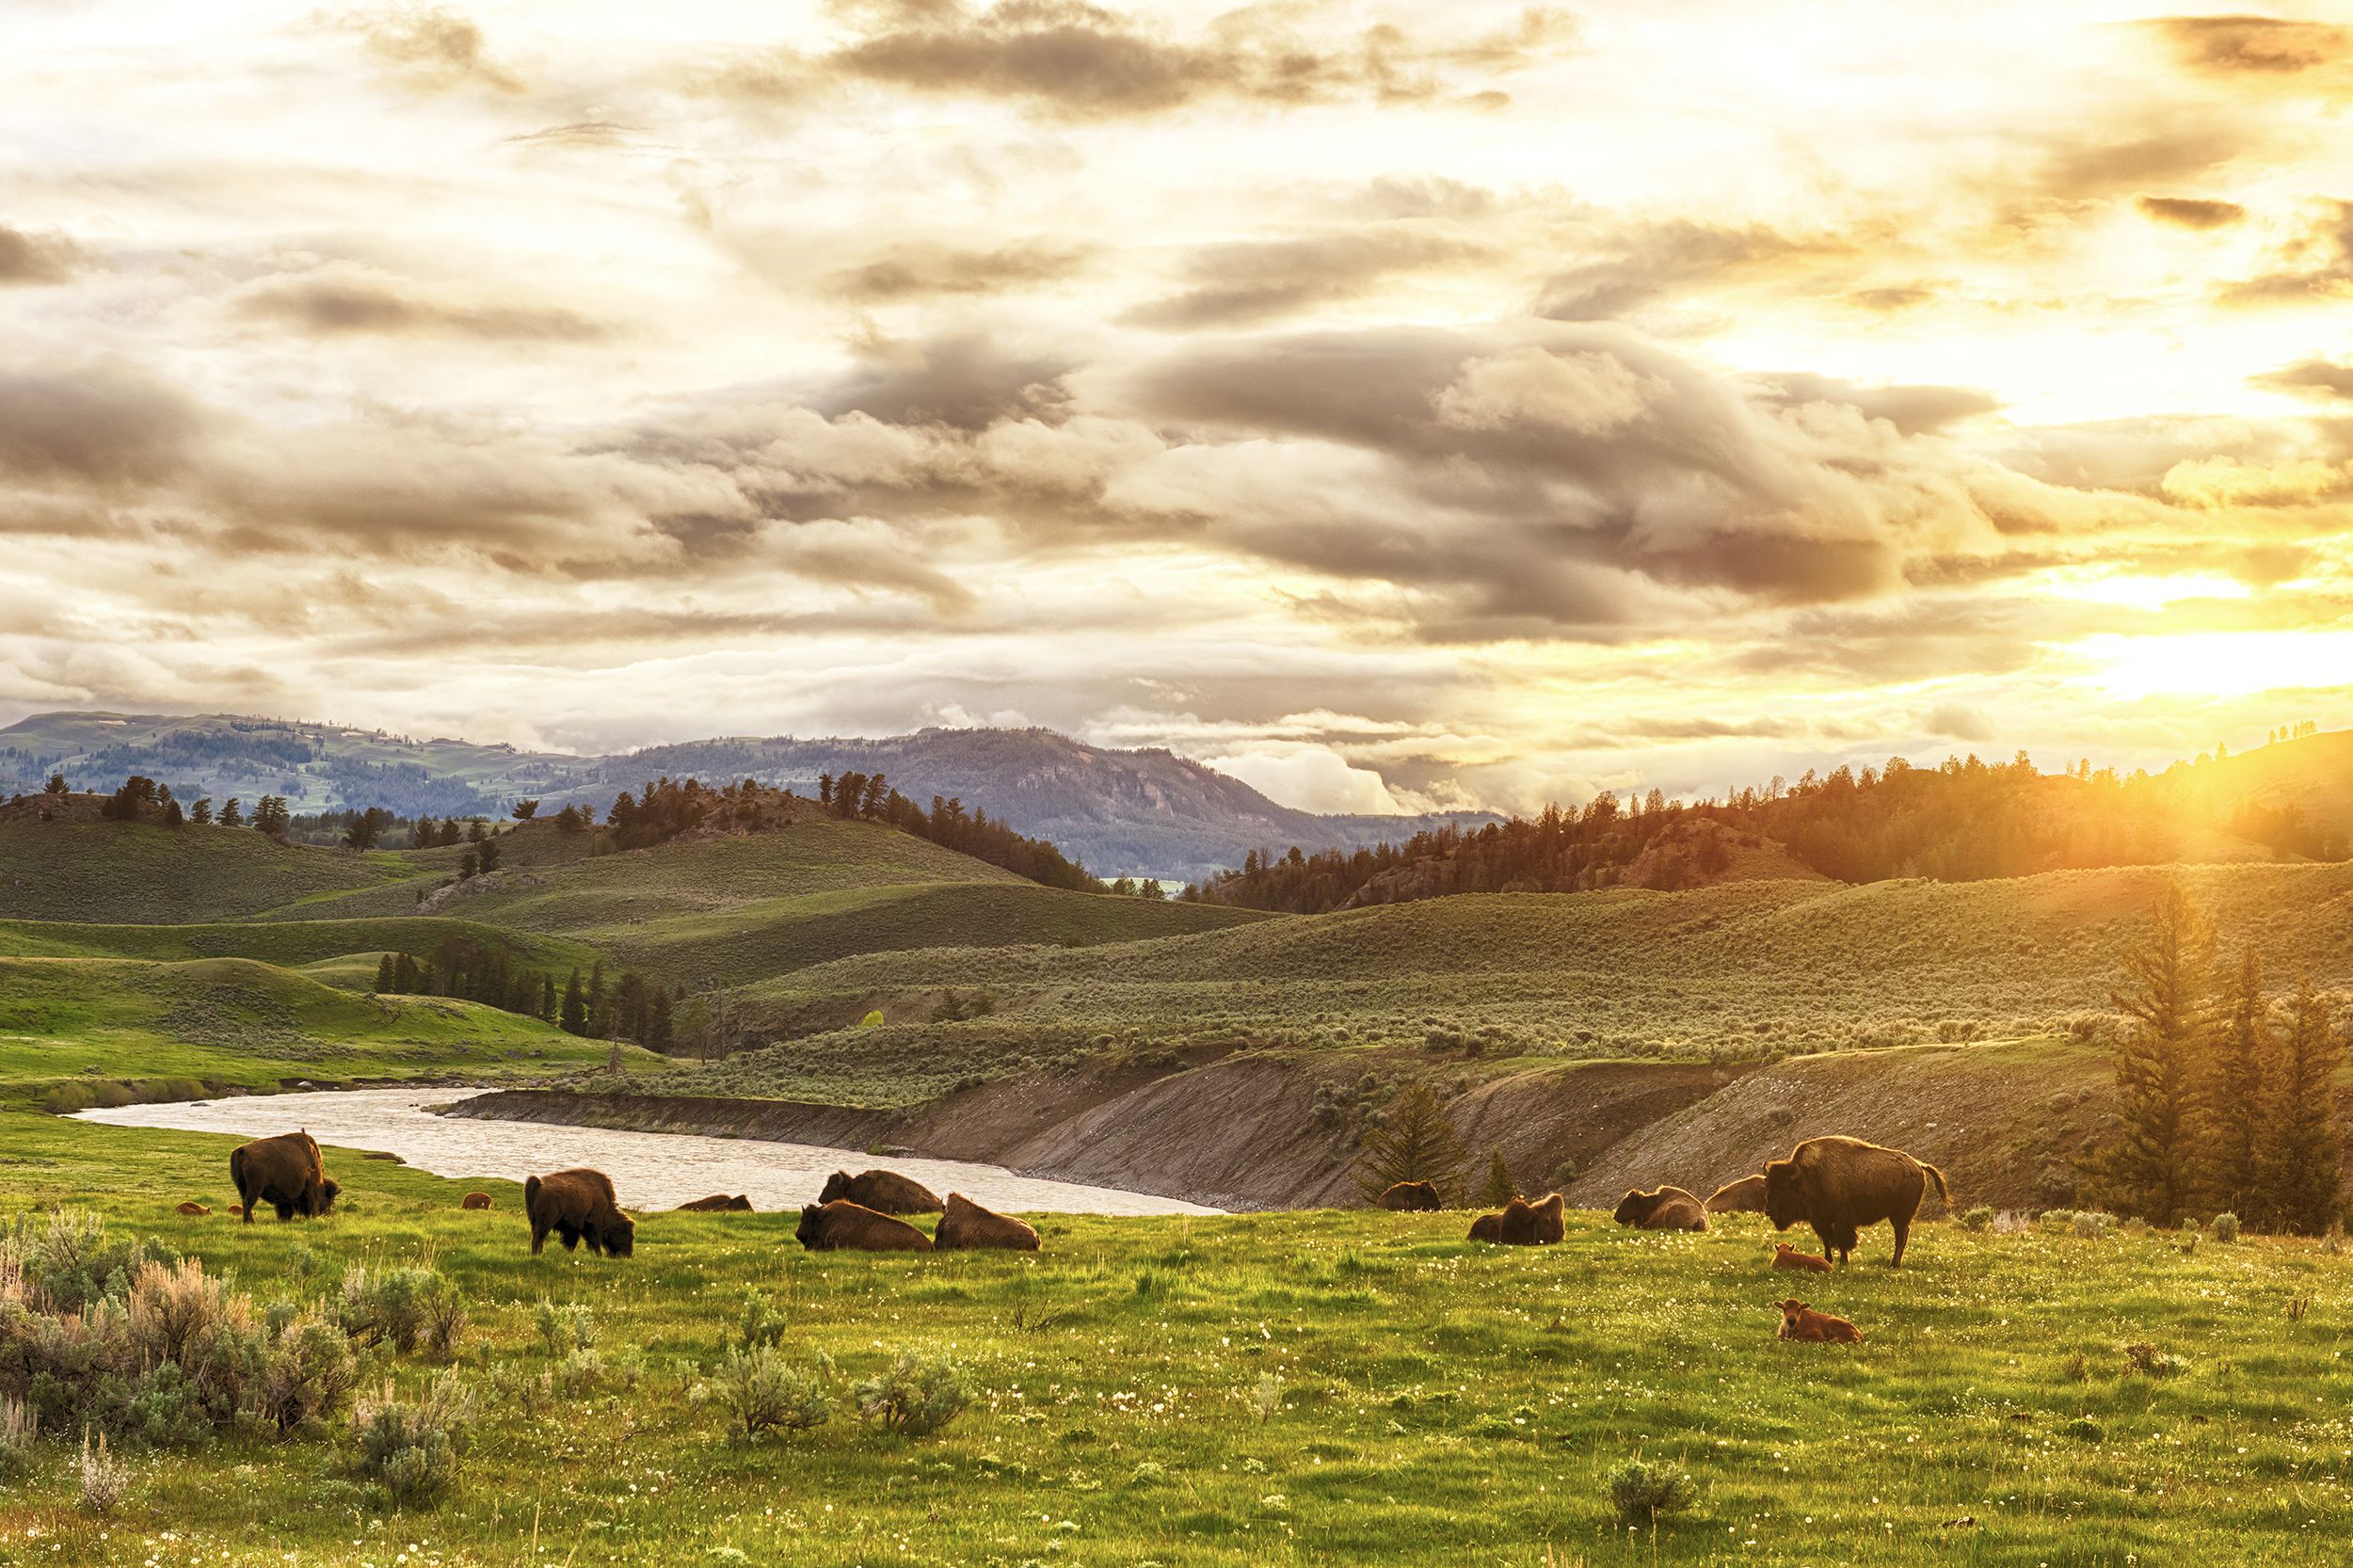 <p>Regarded by many as the first national park in the world (some argue the oldest is Bogd Khan Uul National Park in Mongolia), Yellowstone showcases some of the most stunning landscapes in this country. From watching the famed geyser Old Faithful erupt to <a href="https://www.yellowstonepark.com/things-to-do/top-10-kid-activities">walking around Grand Prismatic Spring</a>, to encountering bison and bears, Yellowstone can be a captivating experience for children. Exploring the park by kayak is yet another option. <a href="https://www.shurradventuresyellowstone.com/canyonhikingadventure">Shurr Advenstures</a> offers half- and full-day kayaking trips that allow young participants to build their confidence in the outdoors.</p>